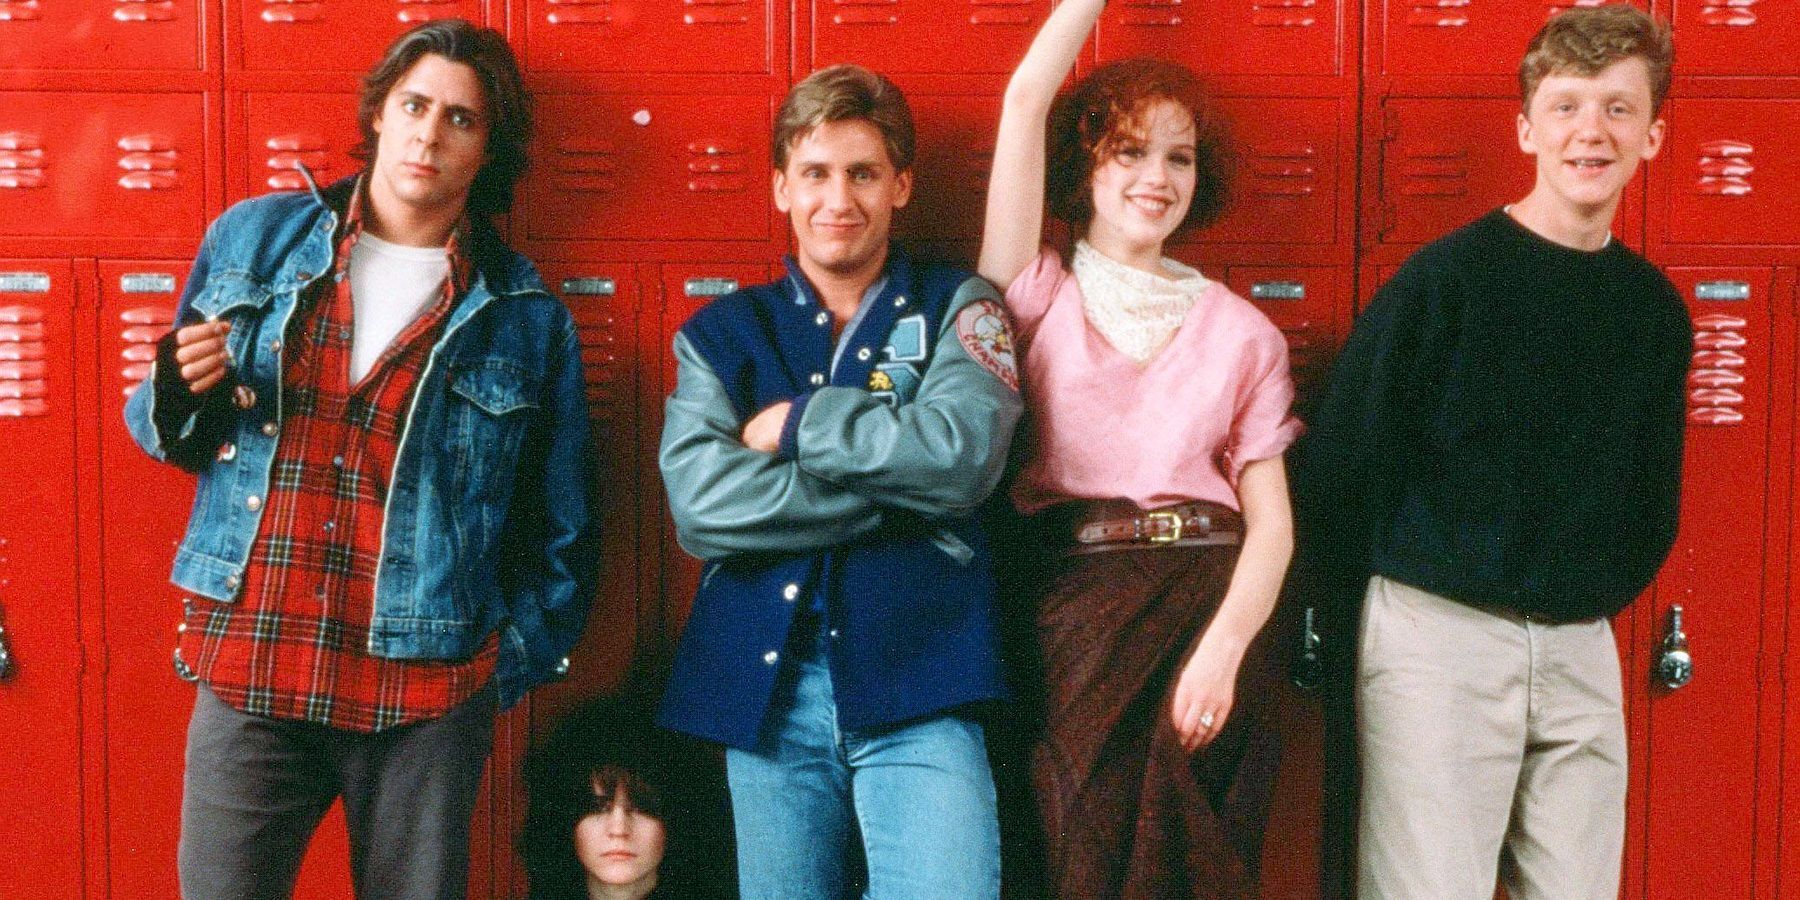 The cast leaning against lockers in Breakfast Club